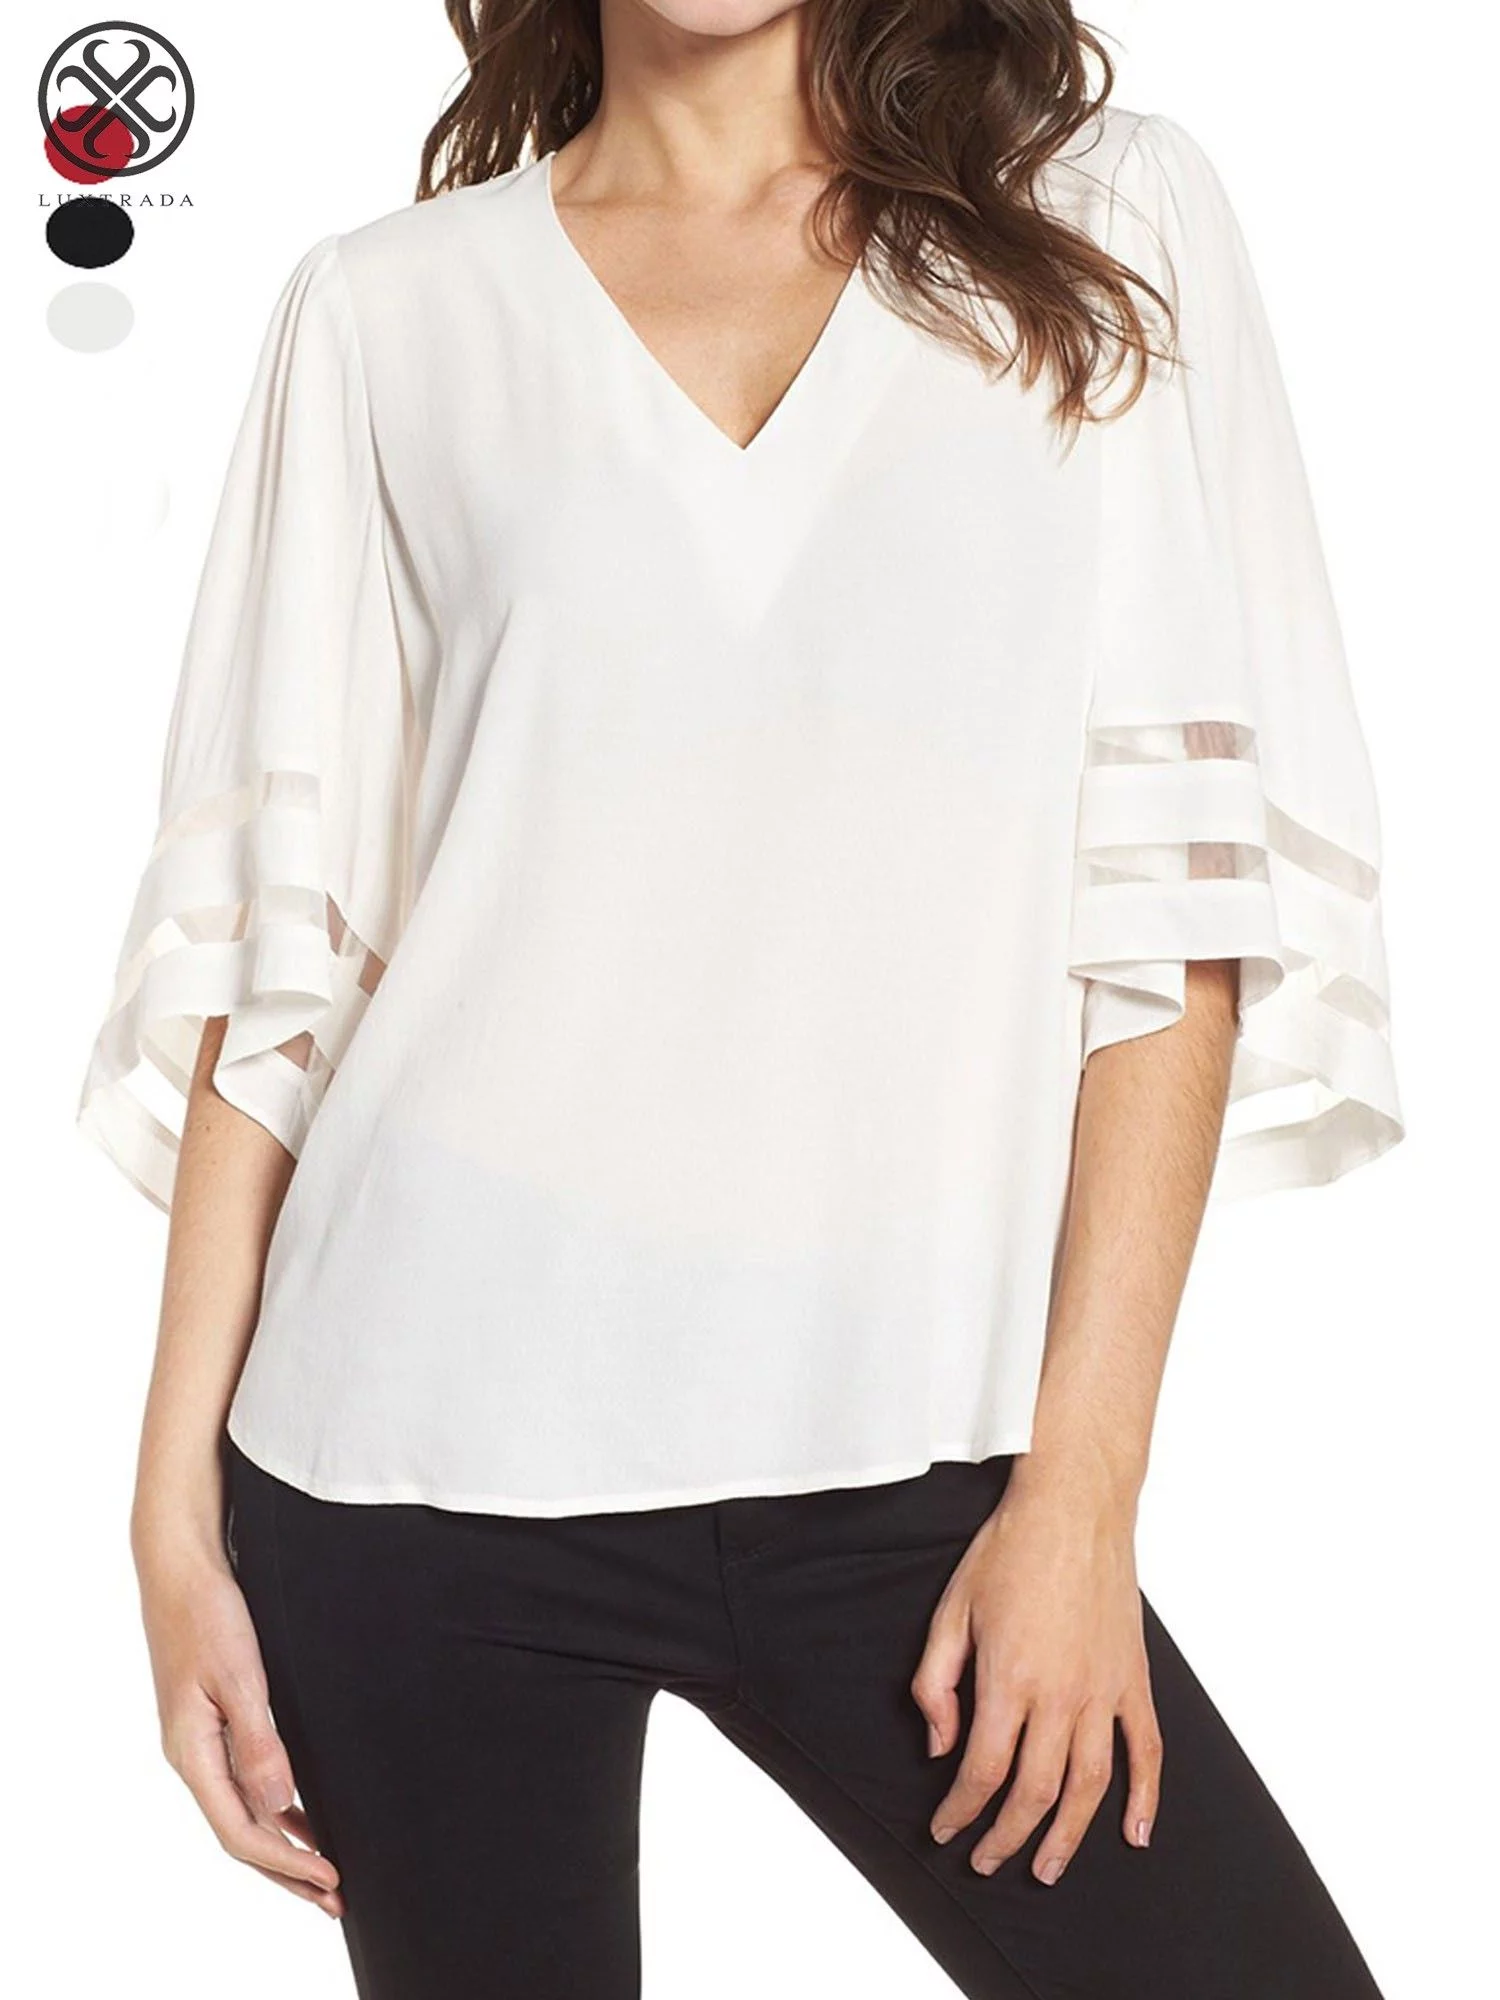 “Blouse Bliss: Exploring Necklines and Sleeve Styles”